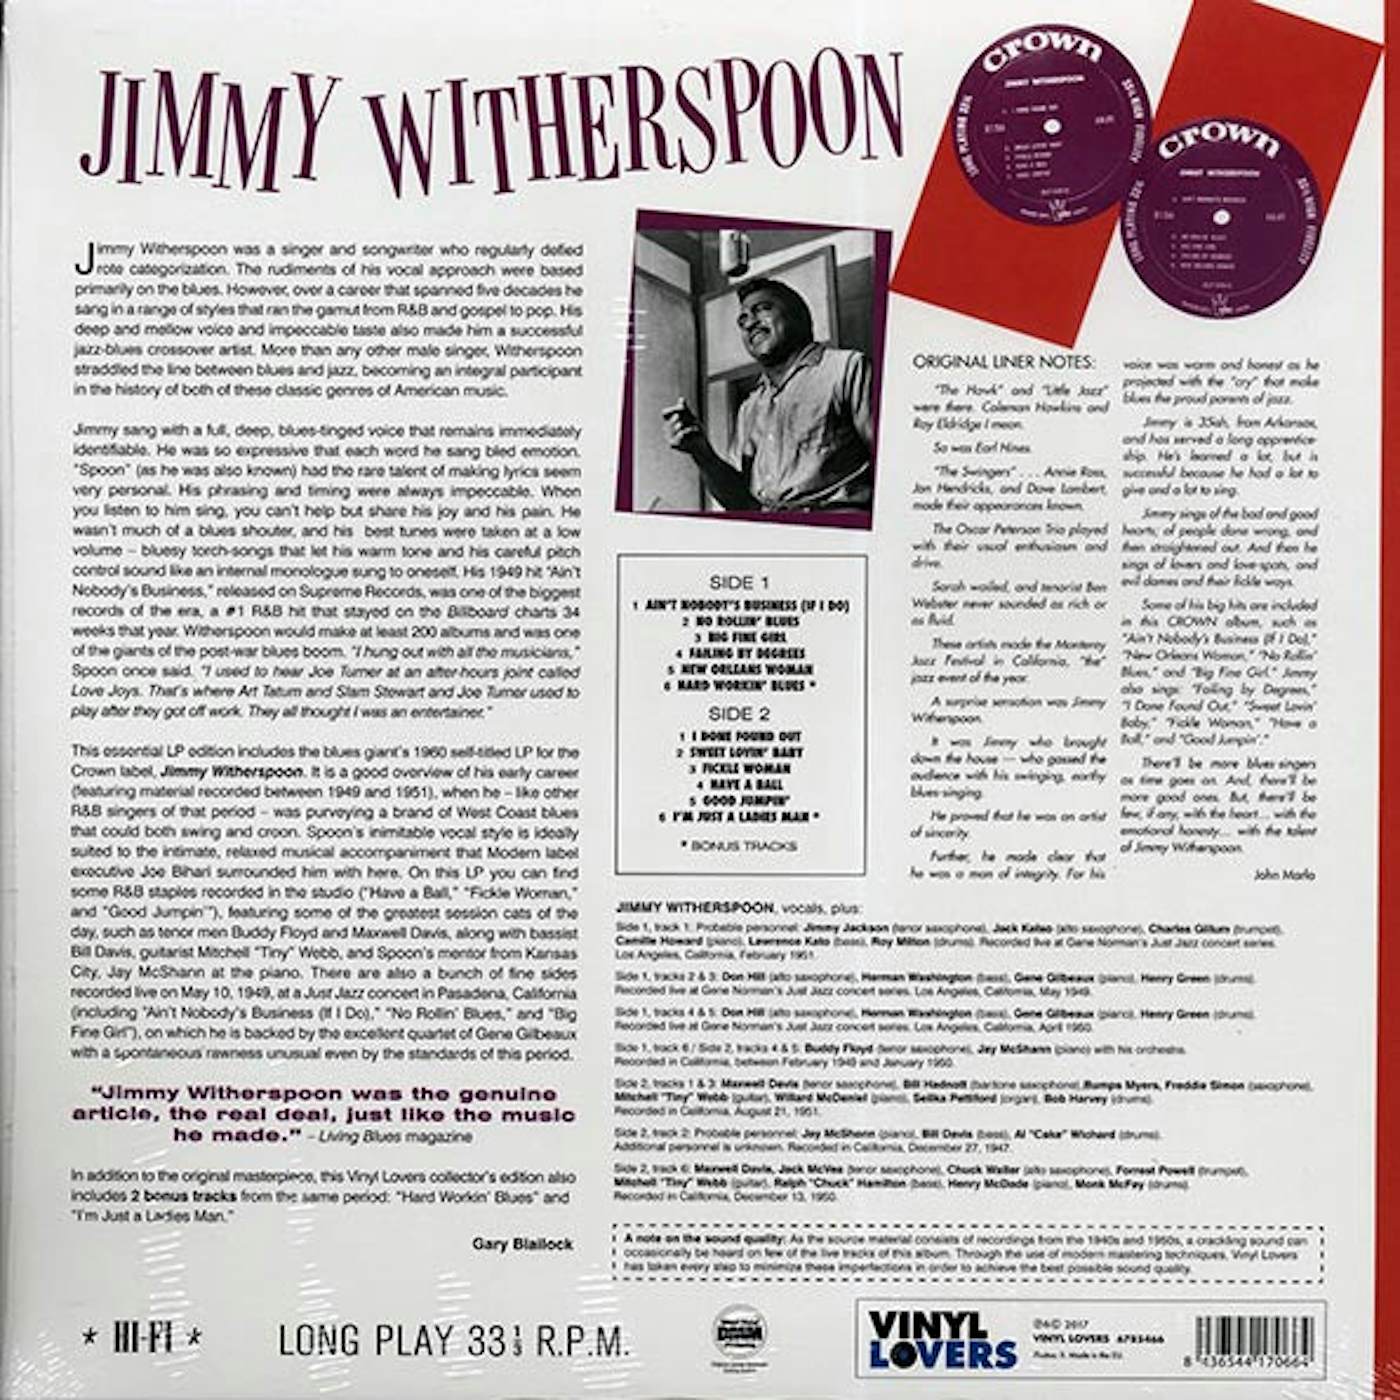 Jimmy Witherspoon  LP -  Jimmy Witherspoon (ltd. ed.) (180g) (HighDef VV) (Vinyl)